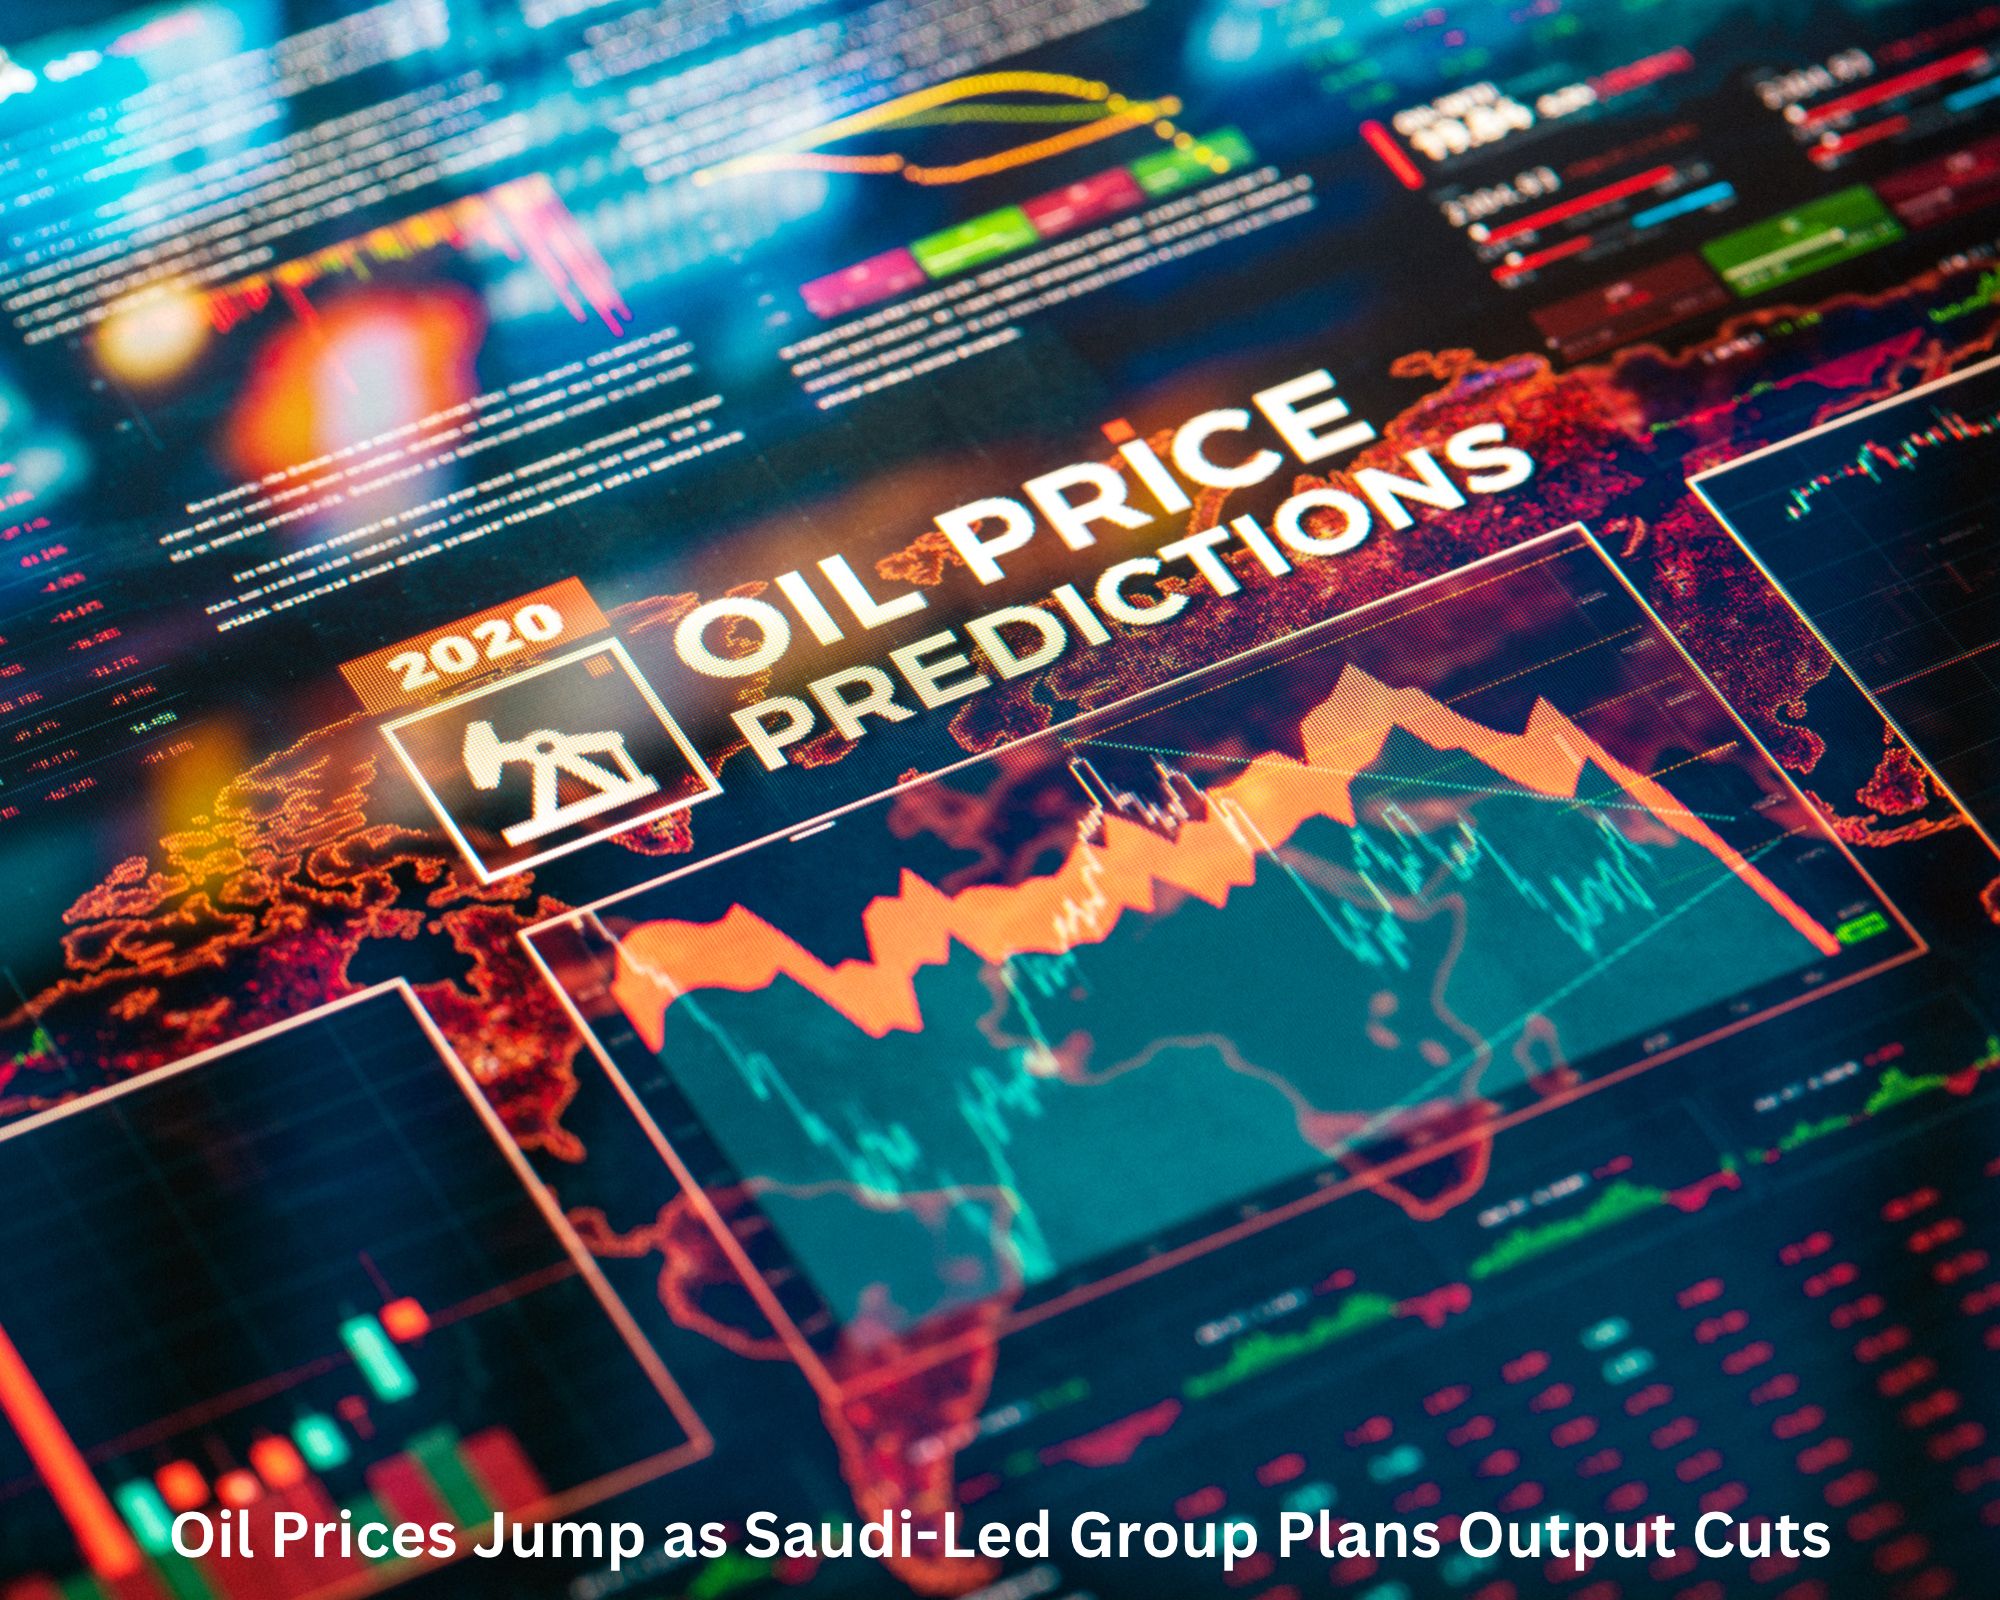 Oil Prices Jump as Saudi-Led Group Plans Output Cuts